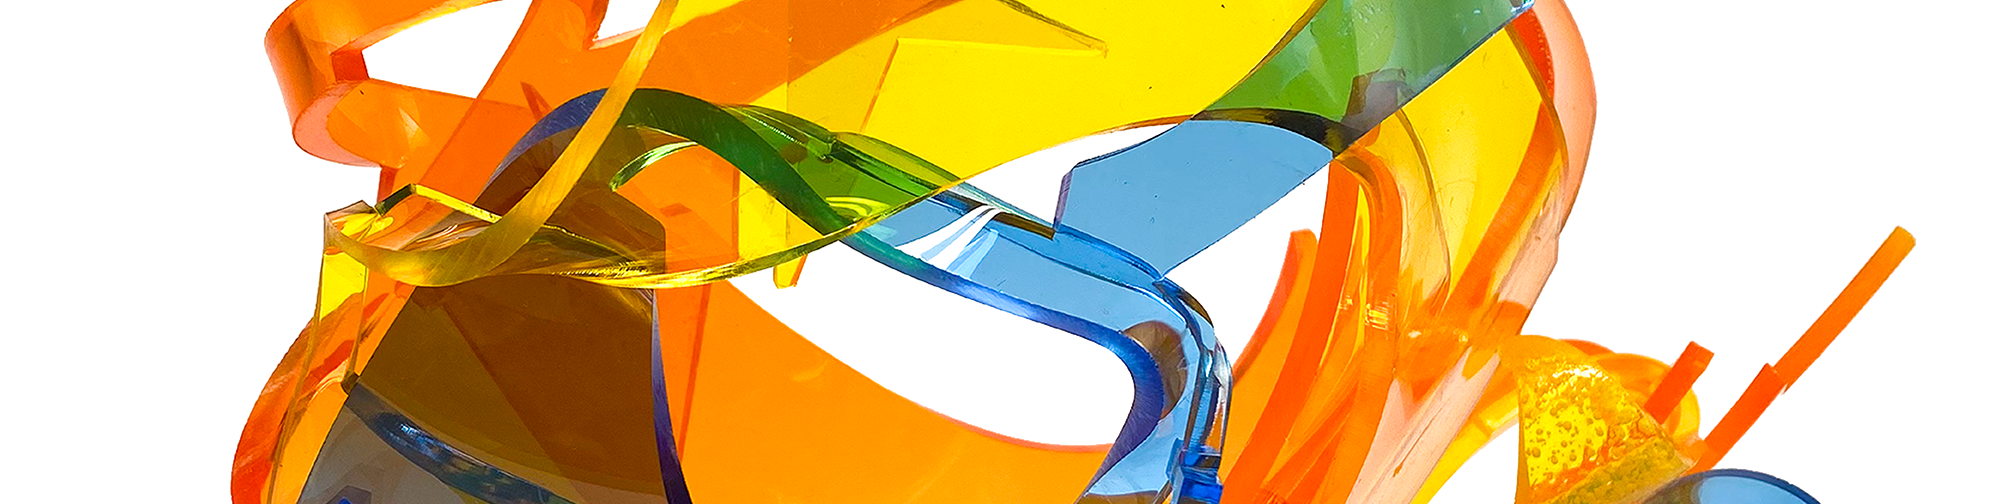 Close up of plexiglass colorful abstract art sculpture by AtomicMobiles.ocm